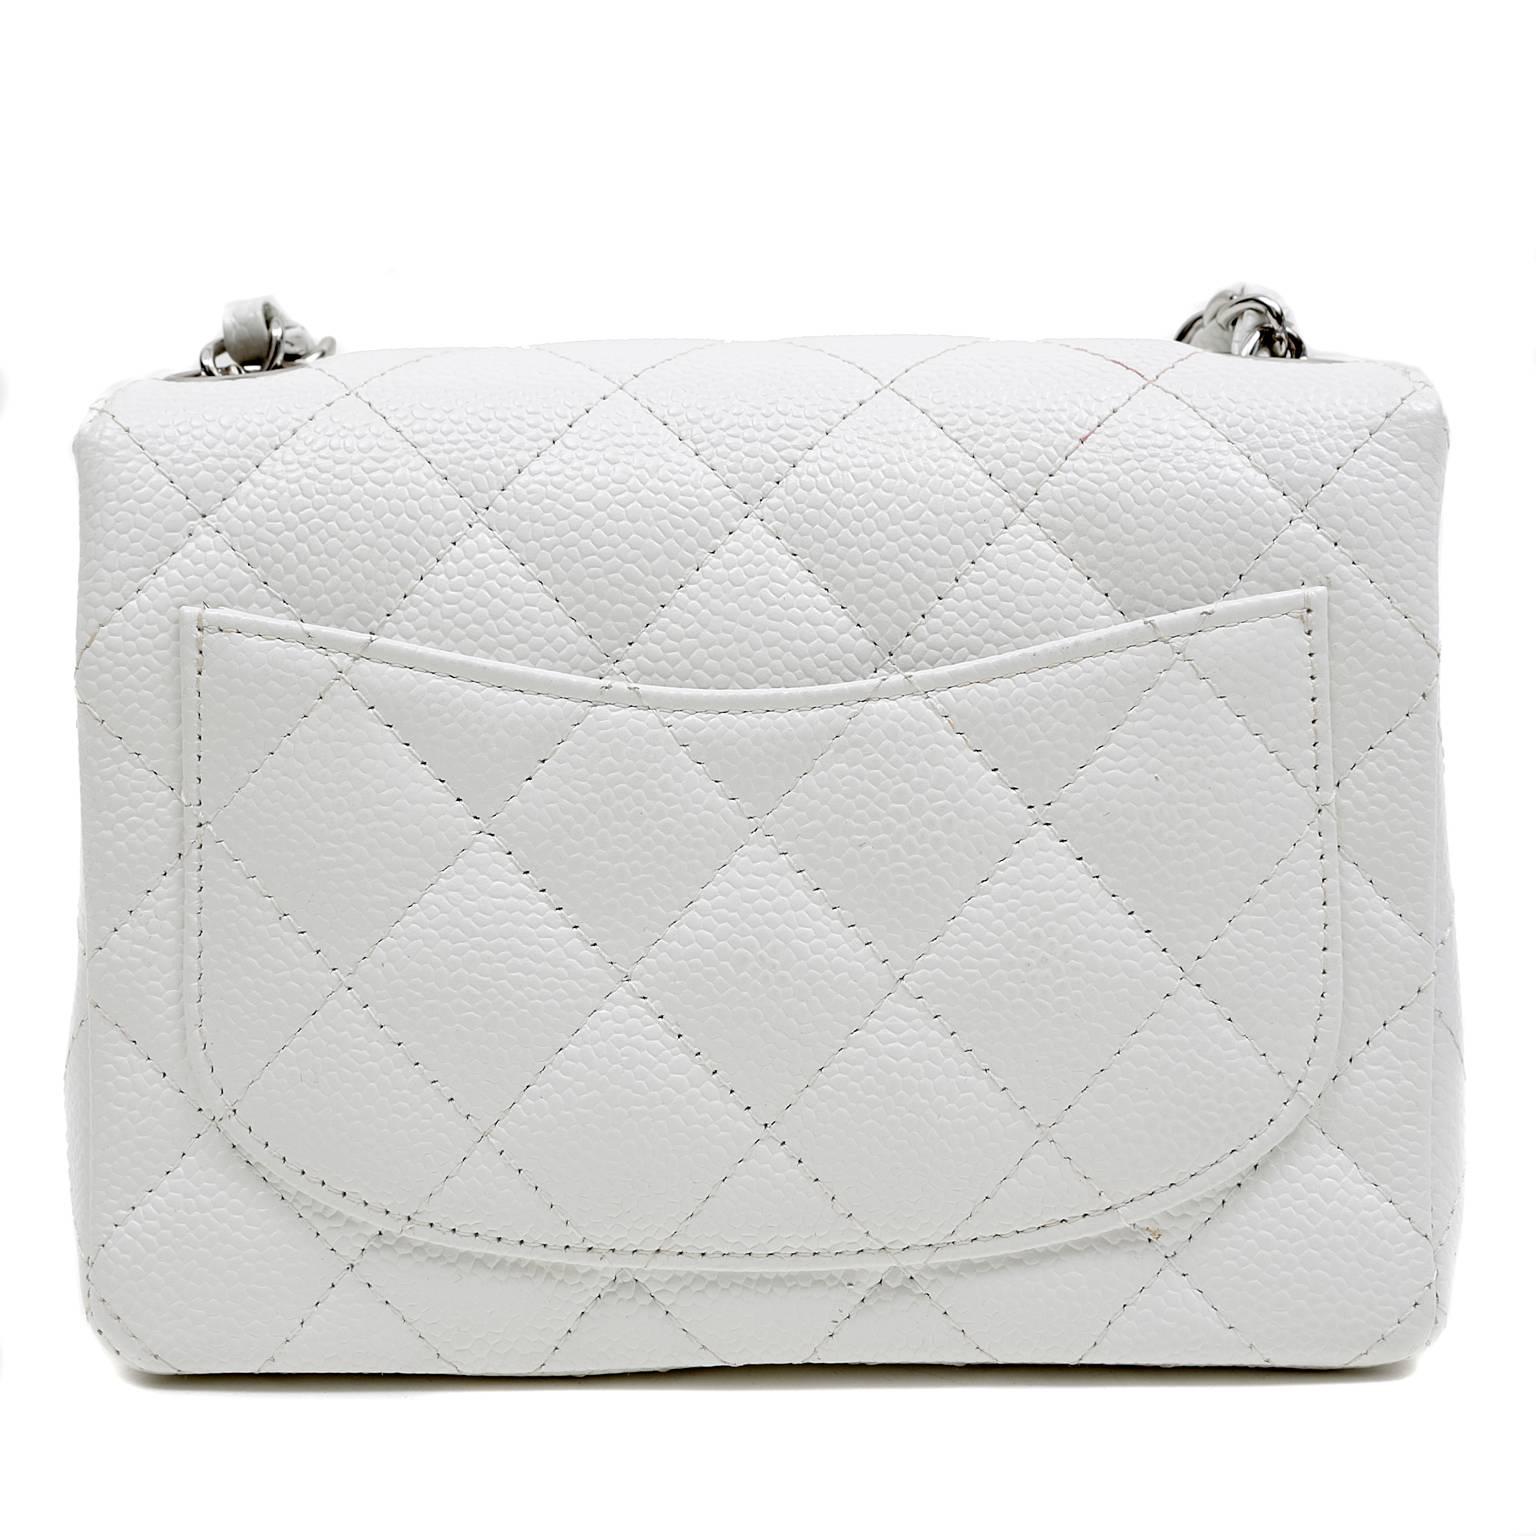 Chanel White Caviar Leather Mini Classic Flap- PRISTINE
Certain to be a go to piece for day or evening in any summer wardrobe, the Mini Classic in white is a must have. 
White caviar leather is textured and very durable.  Signature Chanel diamond